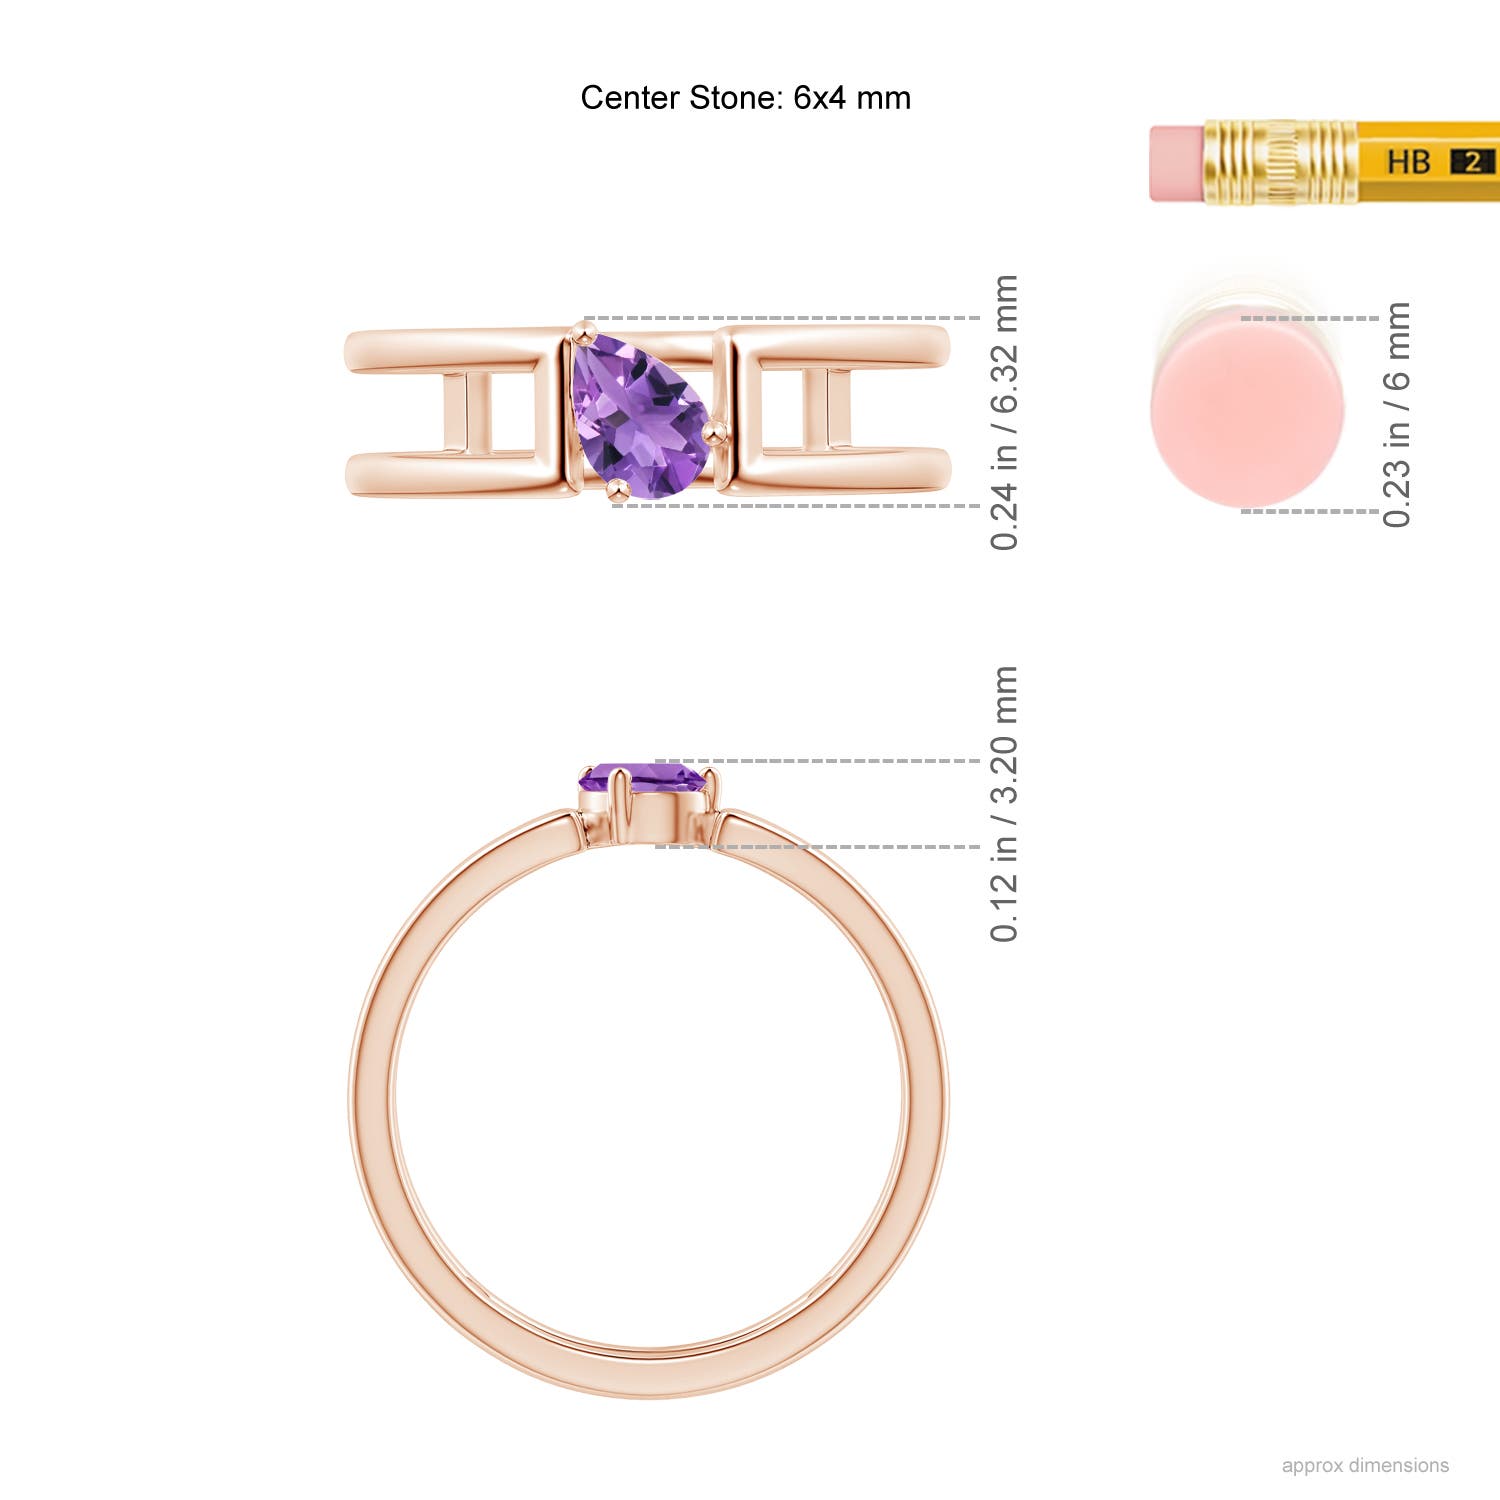 AA - Amethyst / 0.33 CT / 14 KT Rose Gold